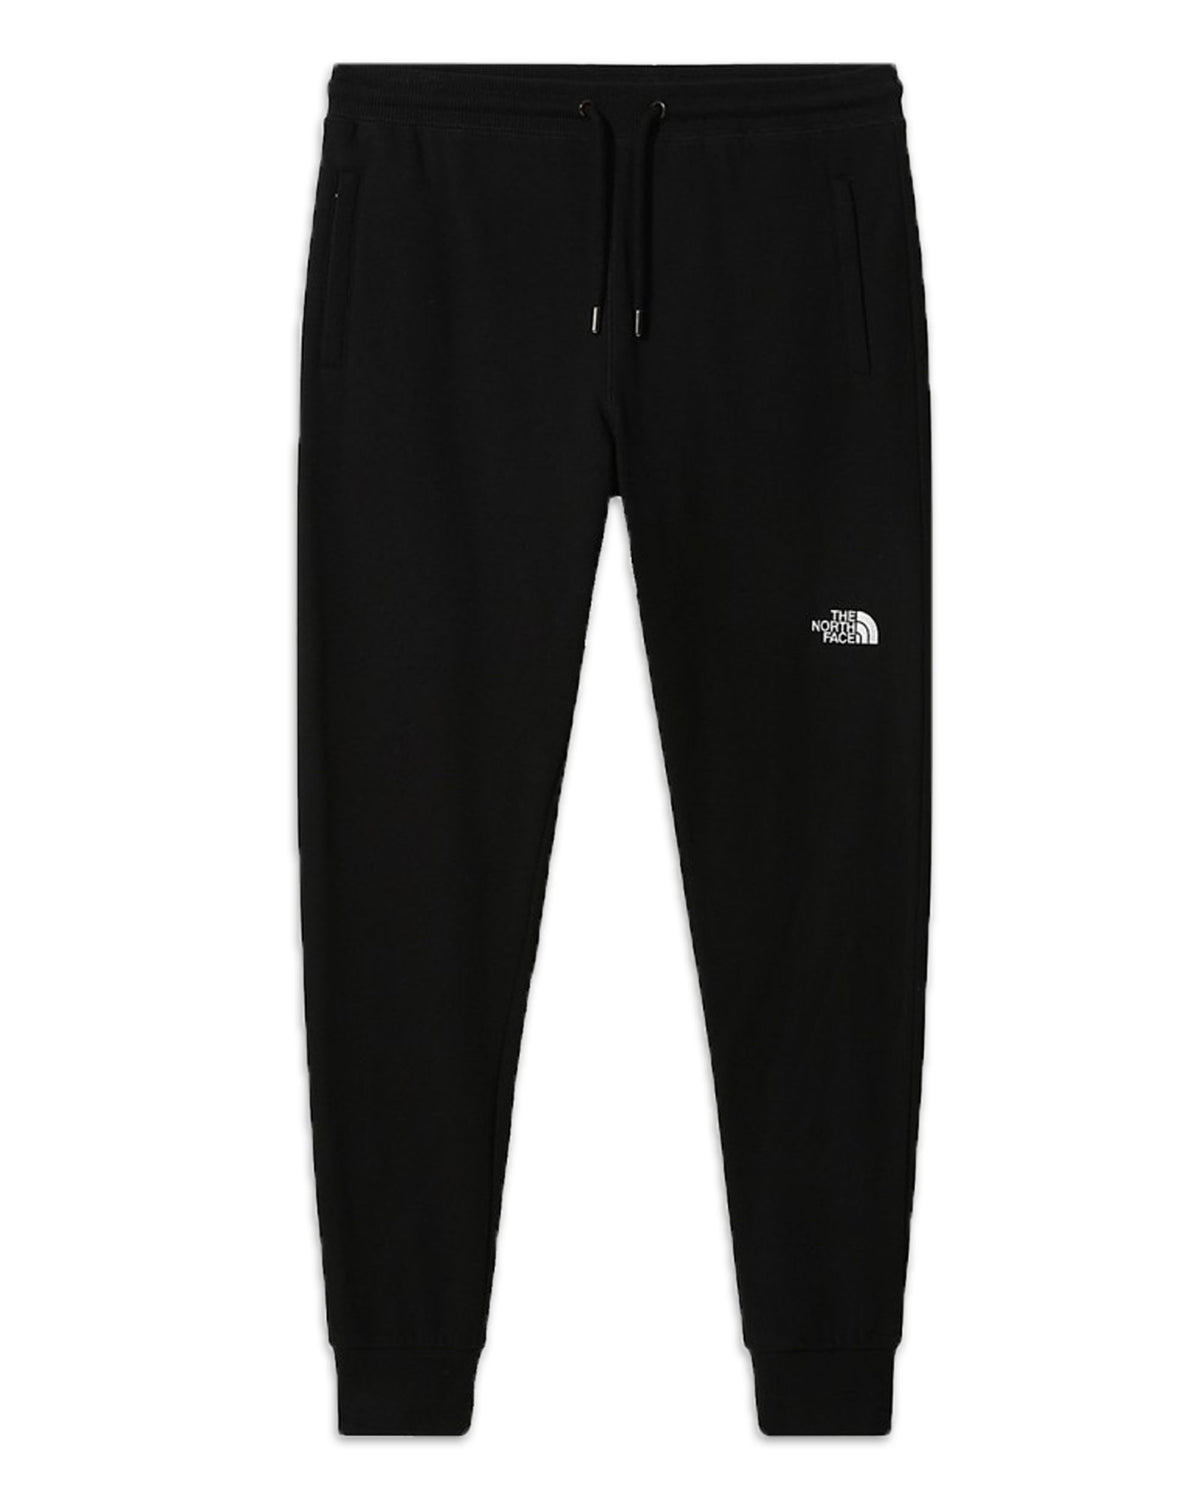 The North Face Nse Pant Black